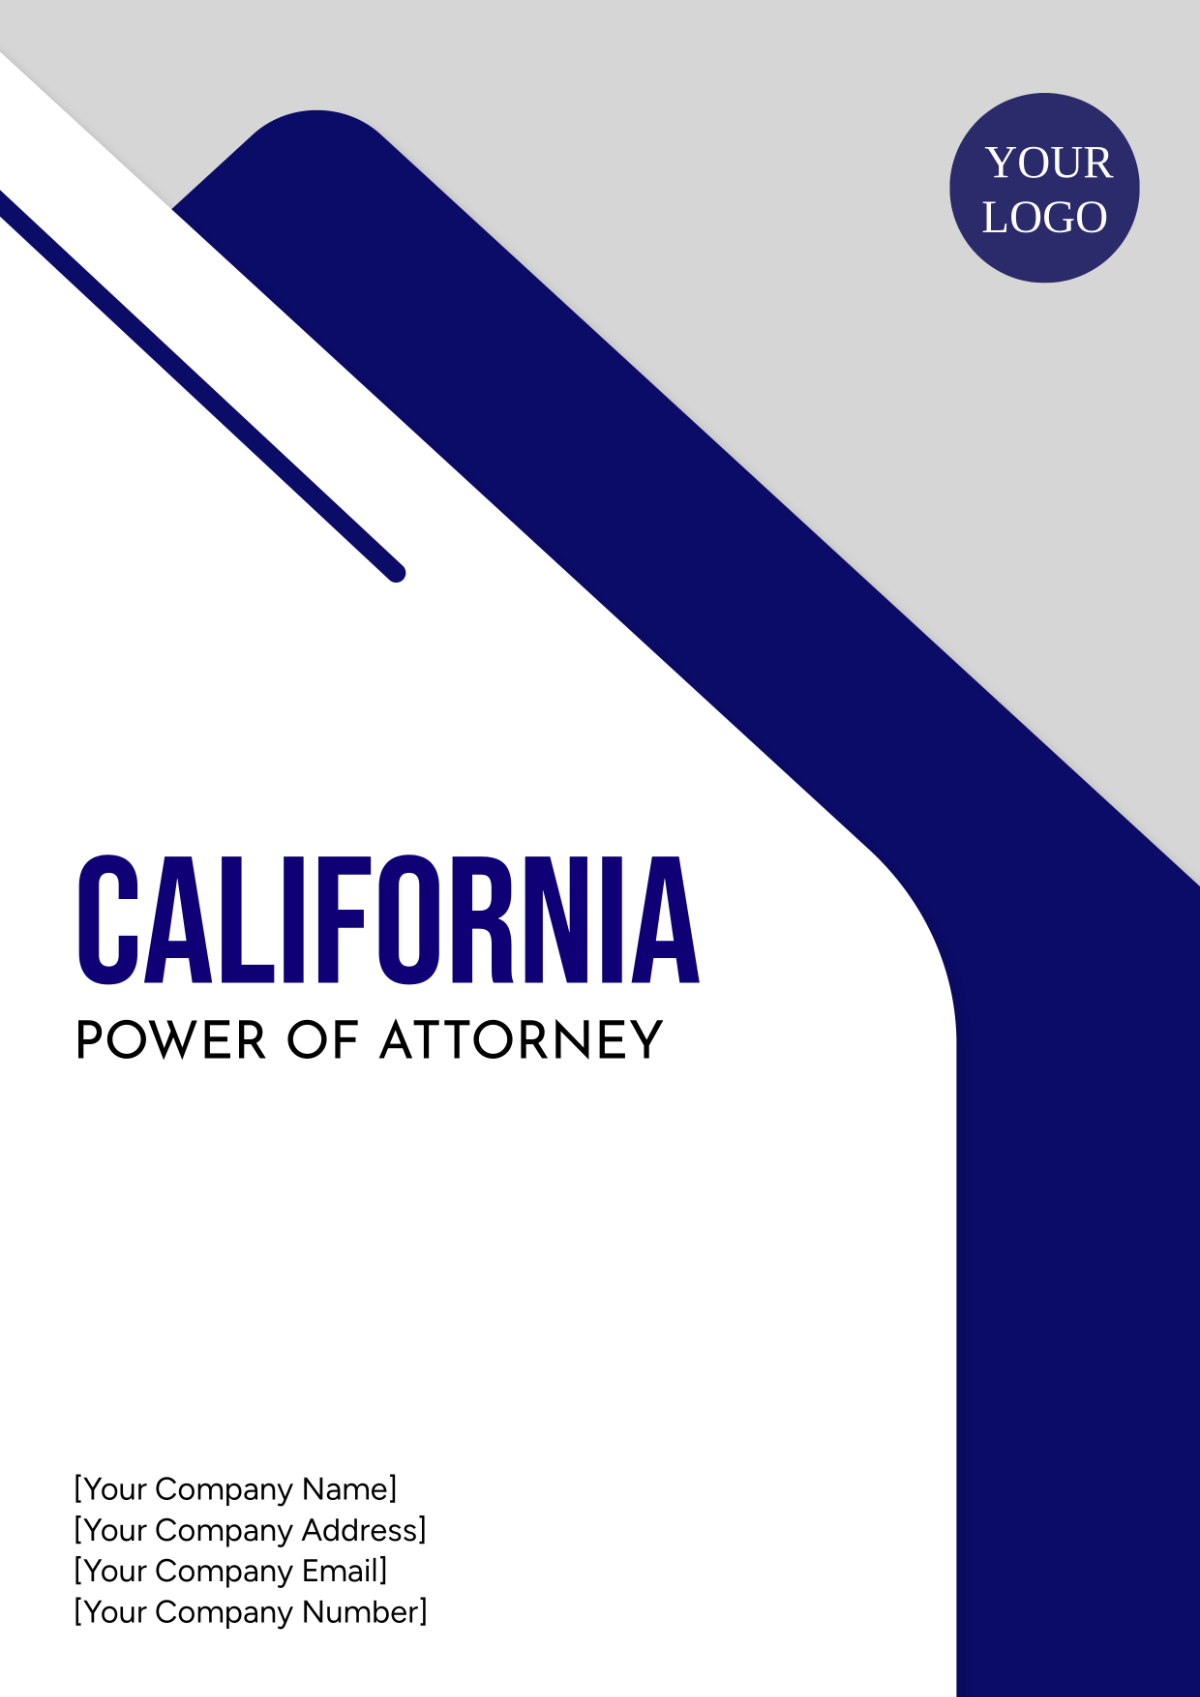 California Power of Attorney Cover Page